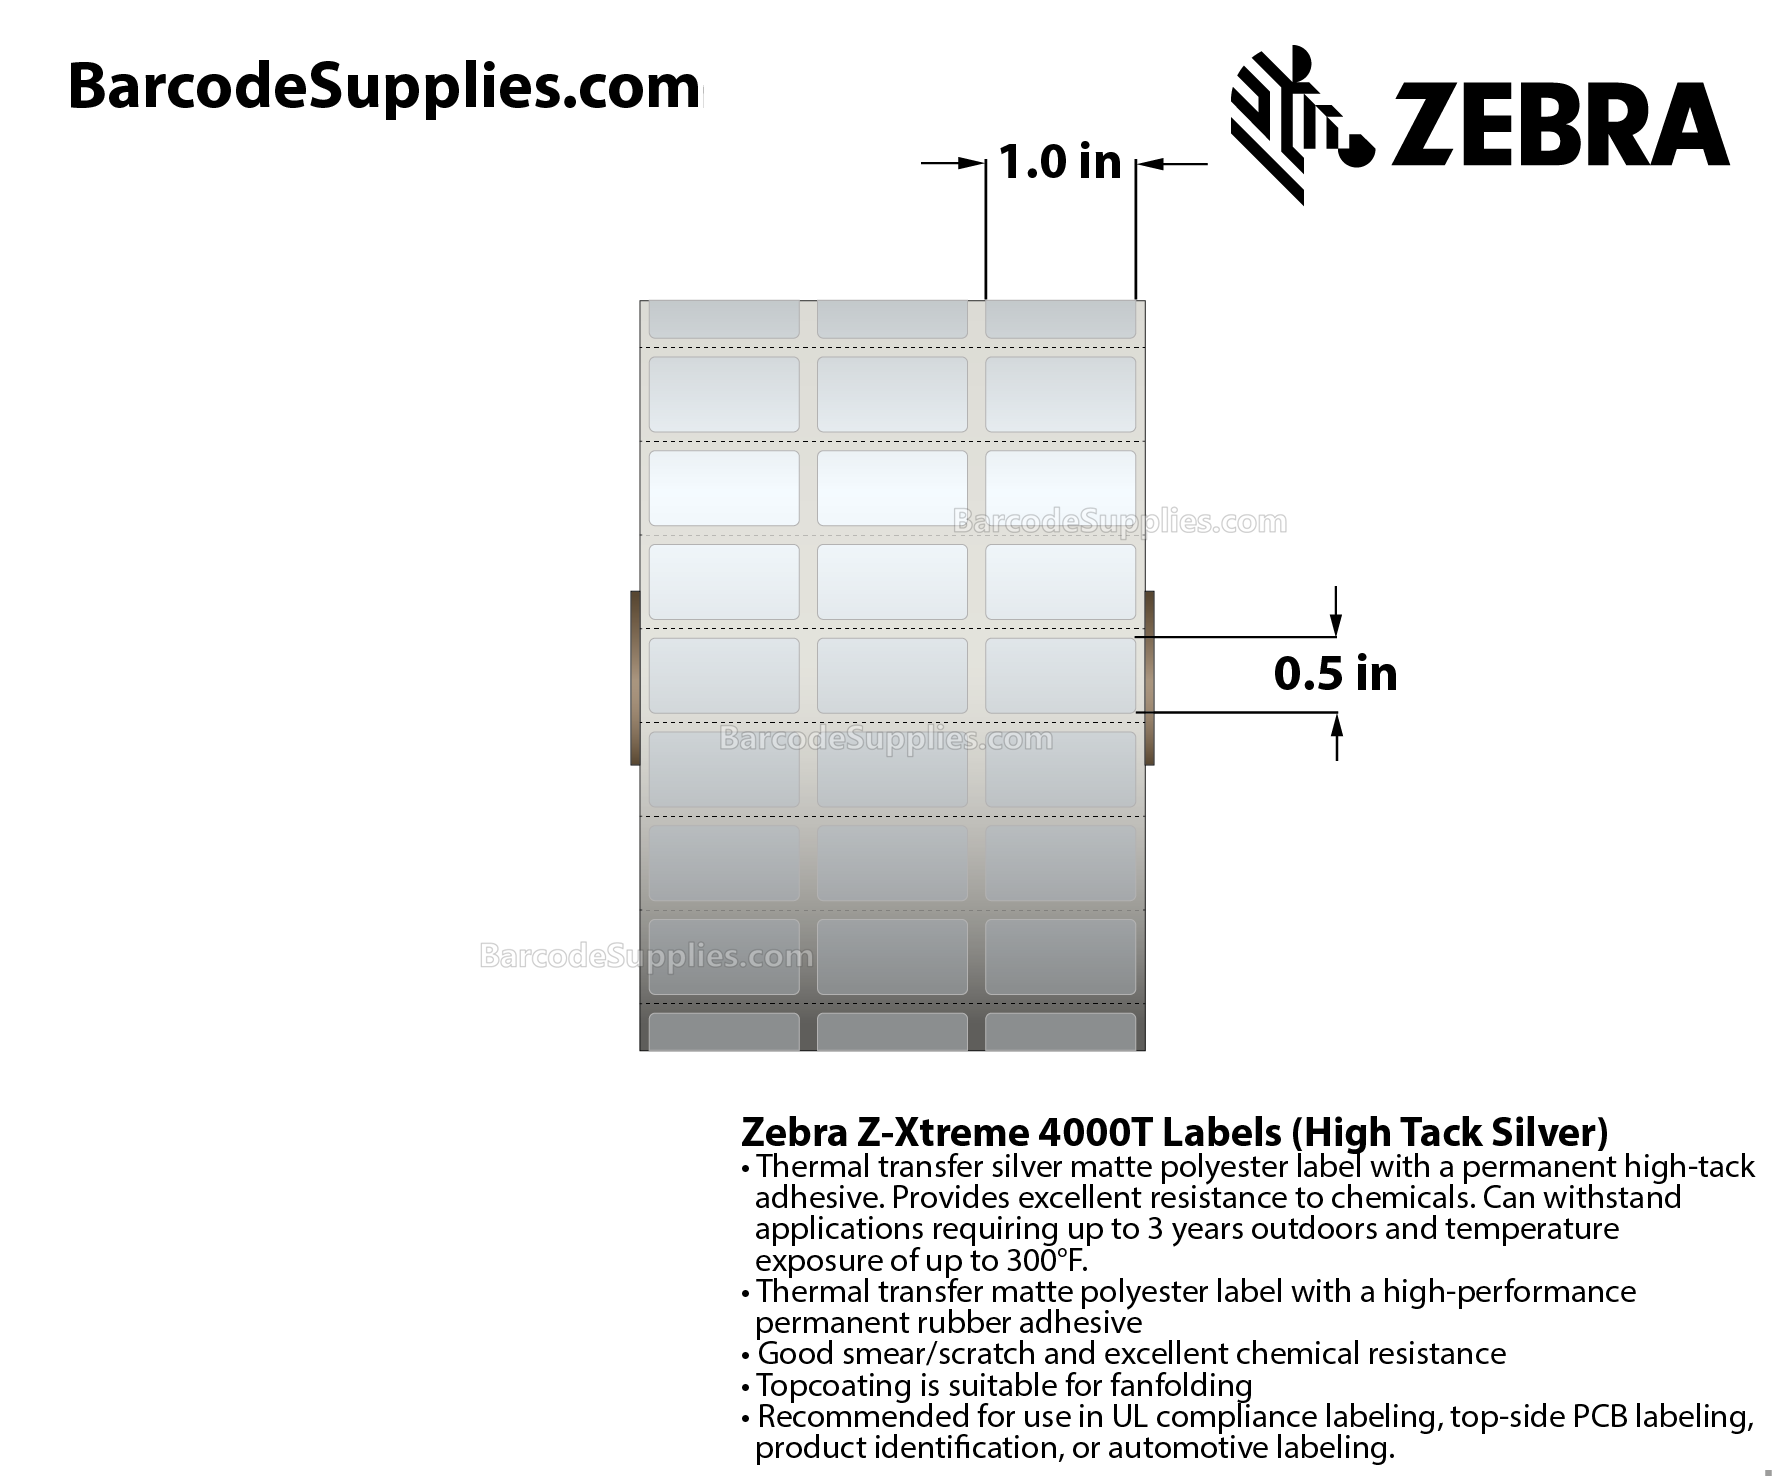 1 x 0.5 Thermal Transfer Silver Z-Xtreme 4000T High-Tack Silver (3-Across) Labels With High-tack Adhesive - Perforated - 5001 Labels Per Roll - Carton Of 1 Rolls - 5001 Labels Total - MPN: 10023169